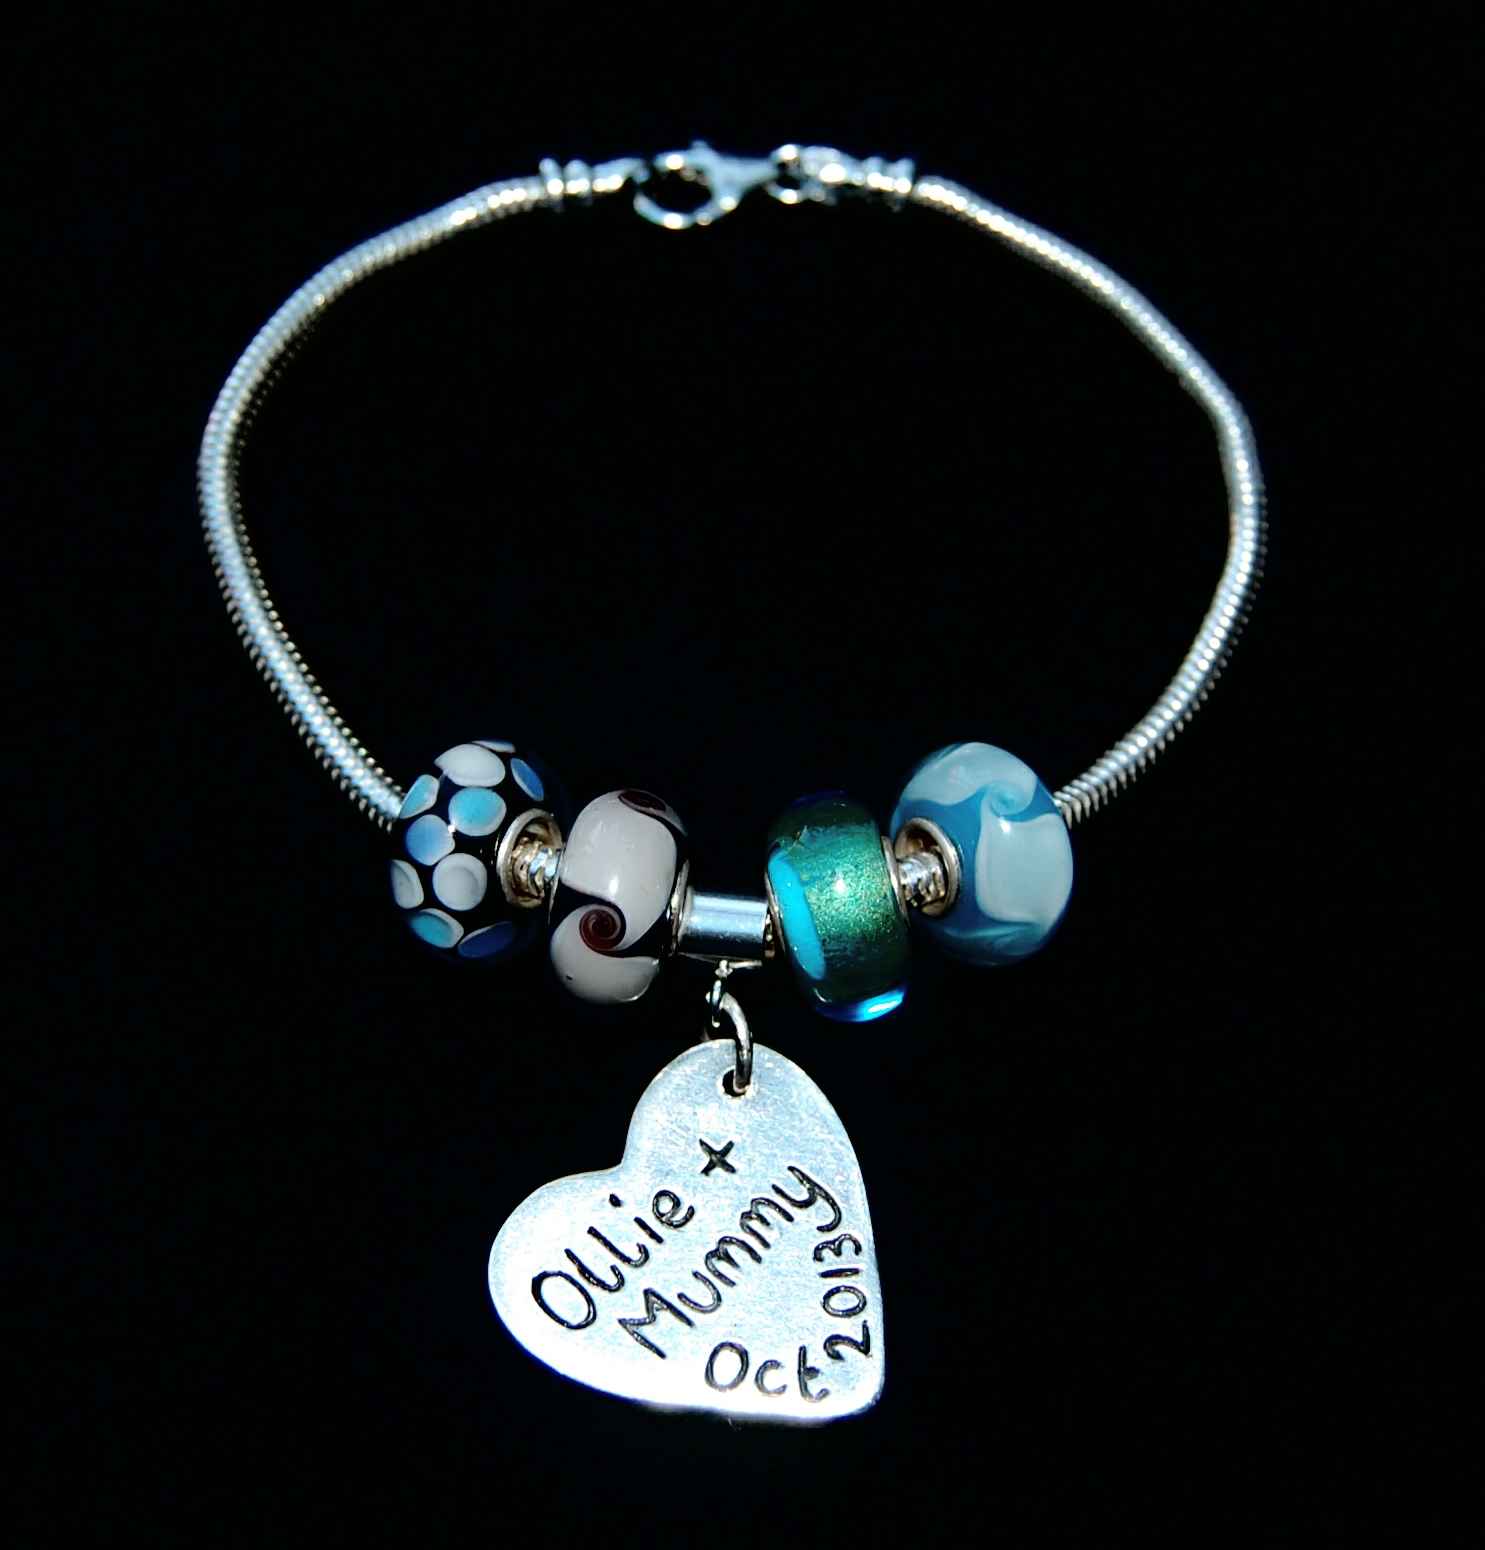 Personalised message on the back of a doodles and signature charm. Bracelet can be purchased separately.